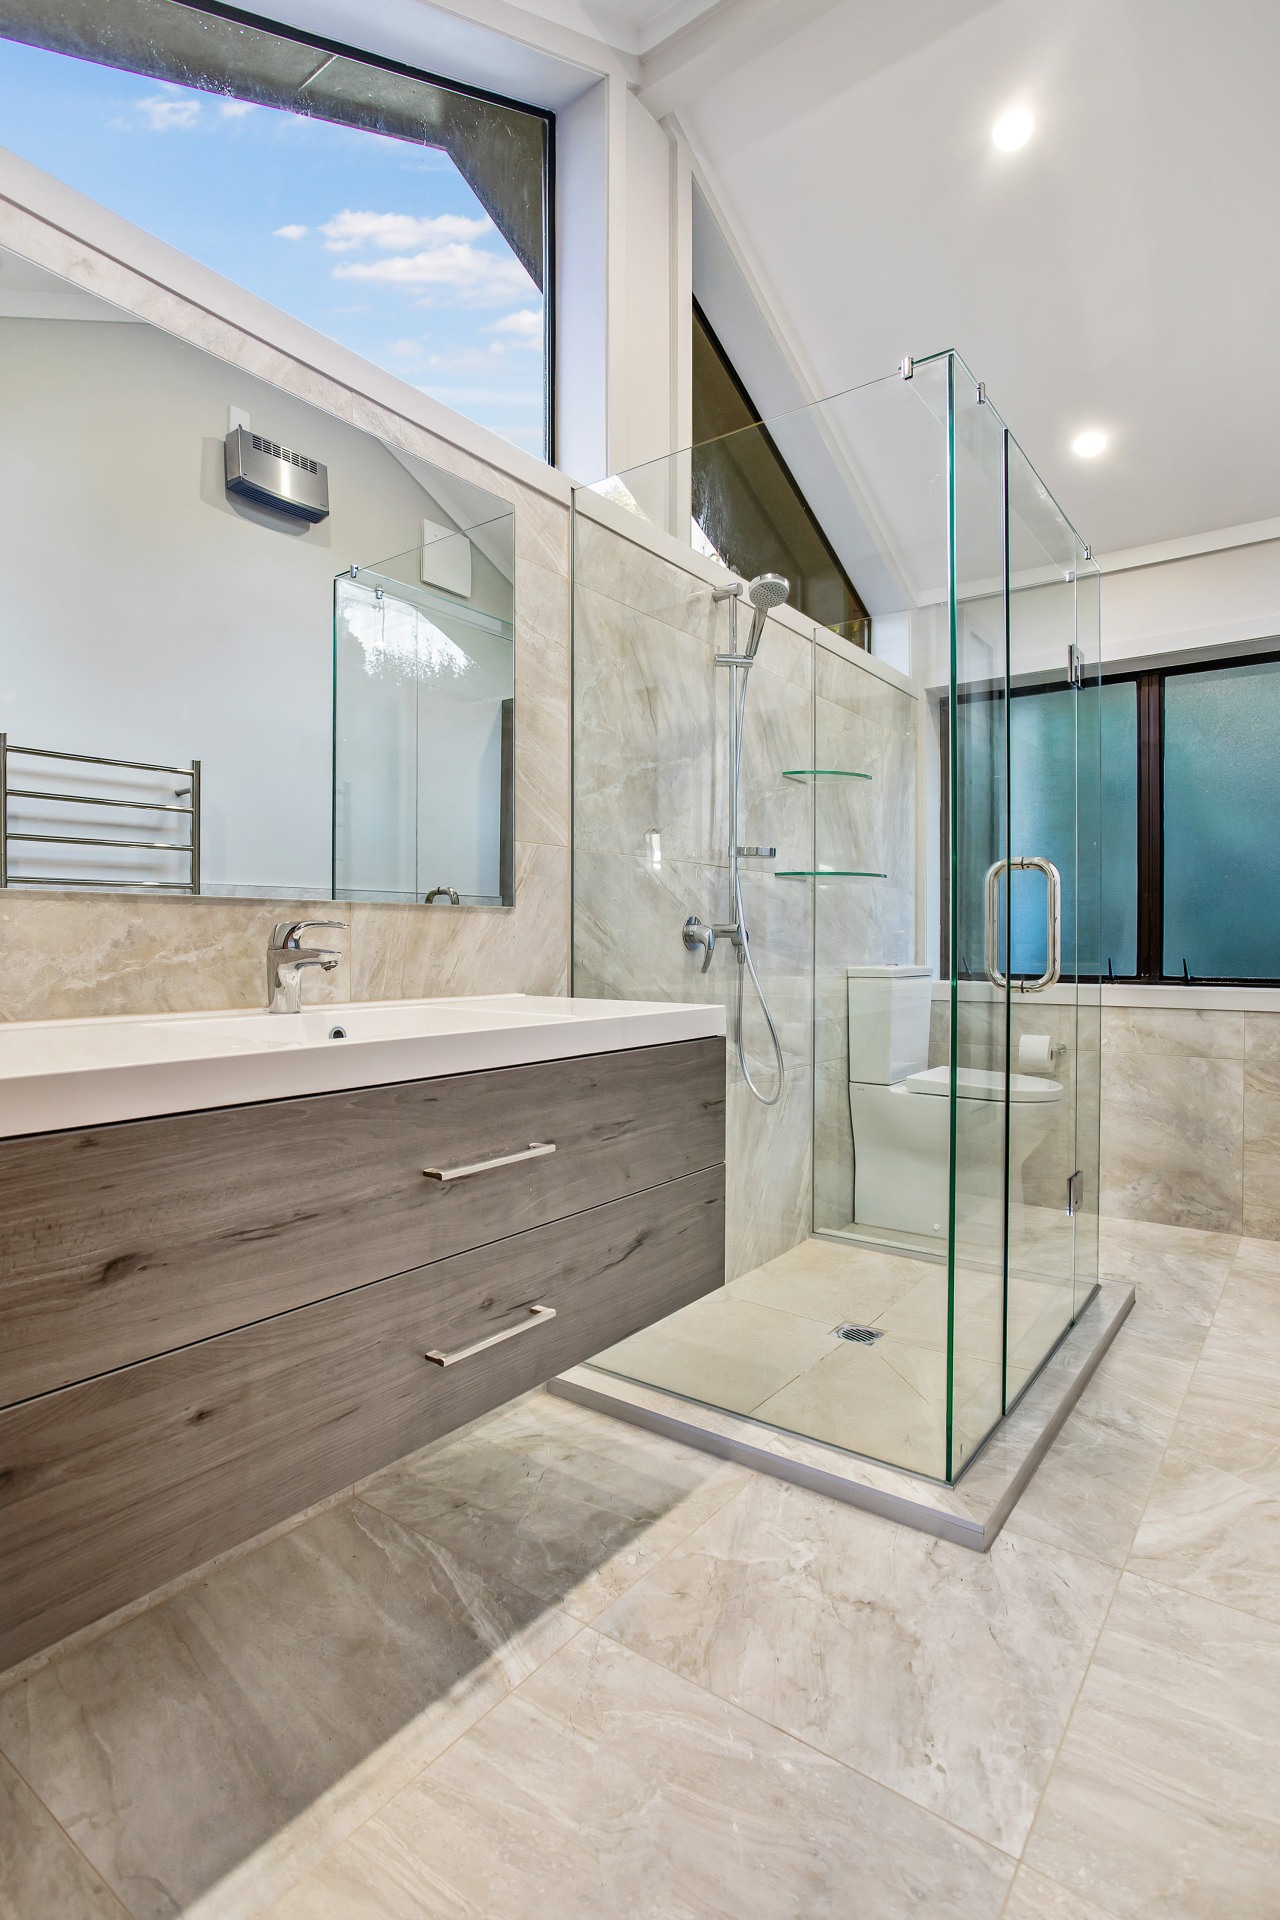 The cantilevered vanity and transparent glass shower stall apartment, architecture, bathroom, building, ceiling, daylighting, estate, floor, flooring, furniture, glass, home, house, interior design, property, real estate, room, space, tile, wall, window, gray